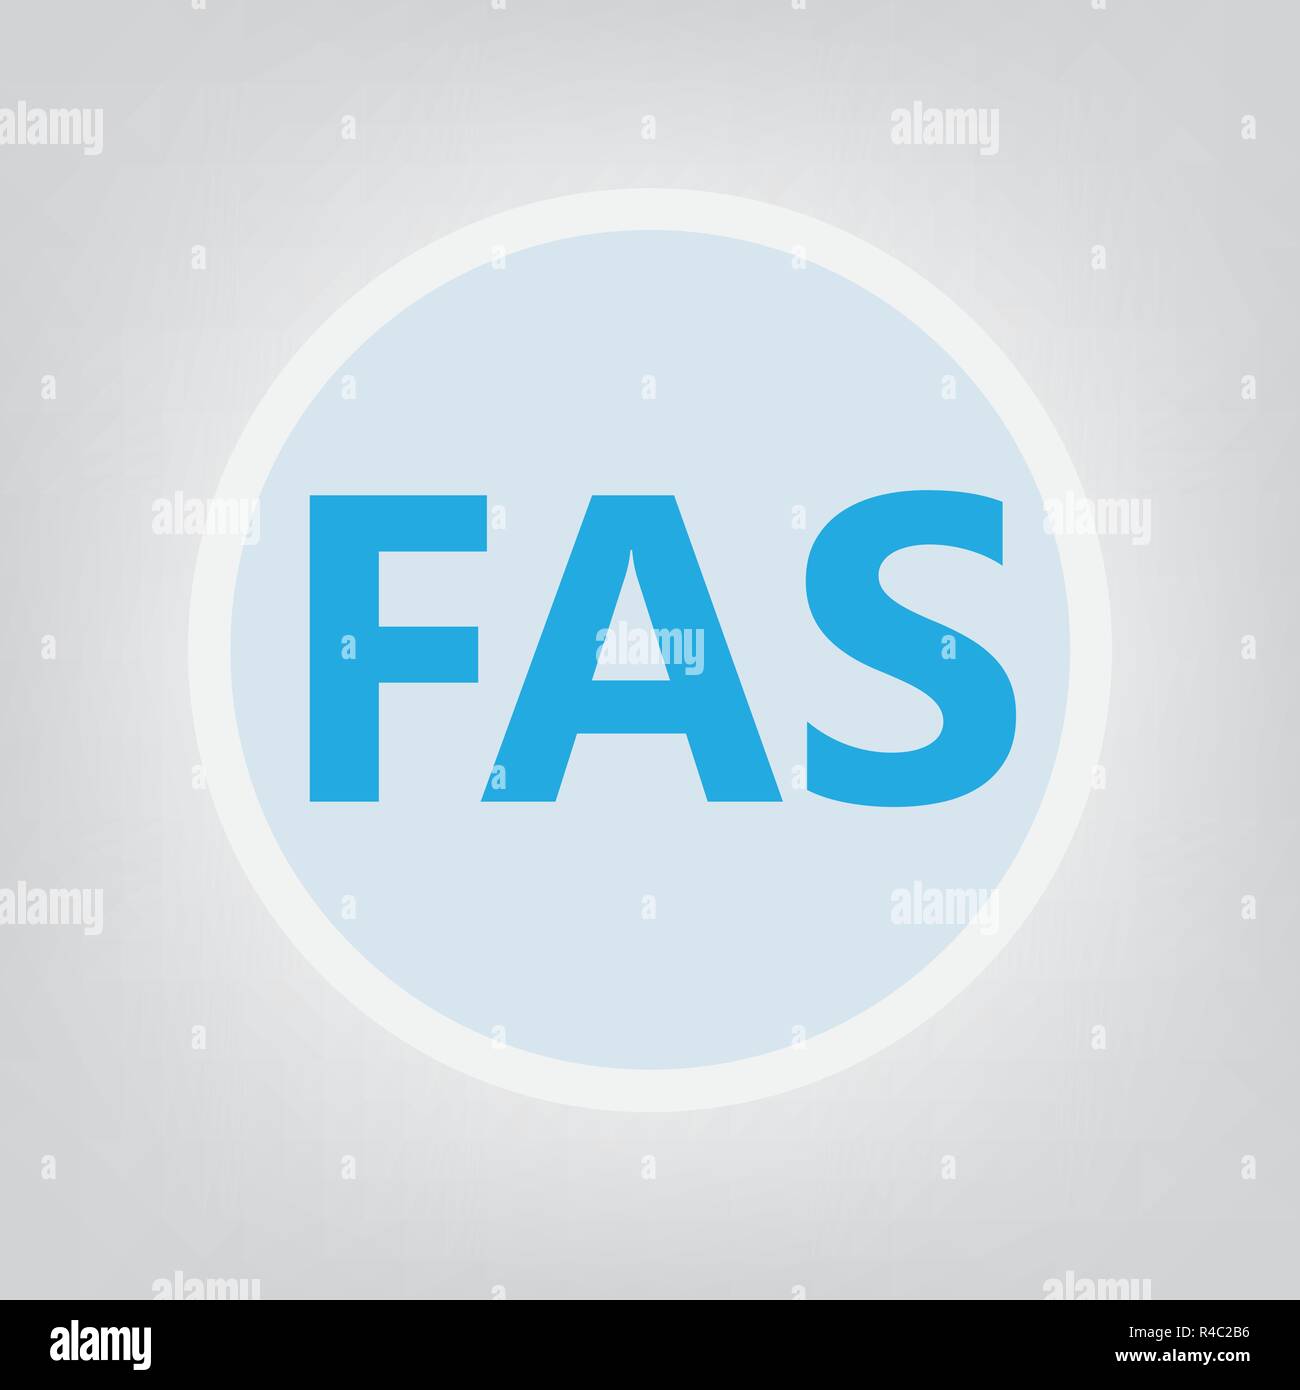 FAS (fetal alcohol syndrome) acronym- vector illustration Stock Vector